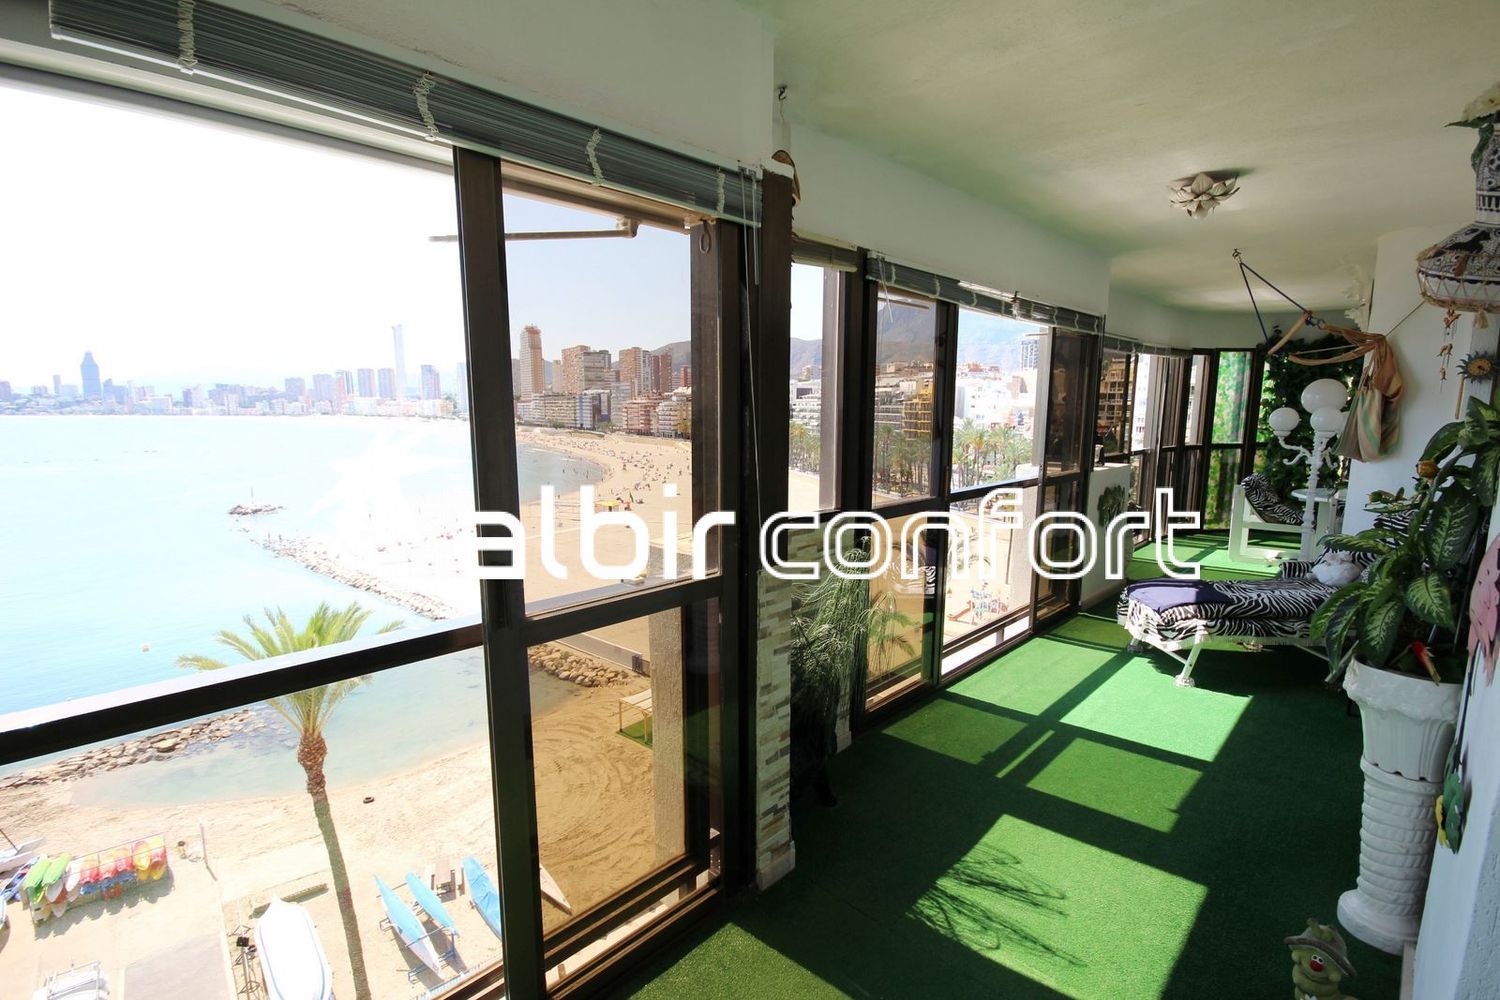 Apartment for sale on the seafront in the Port, in Benidorm